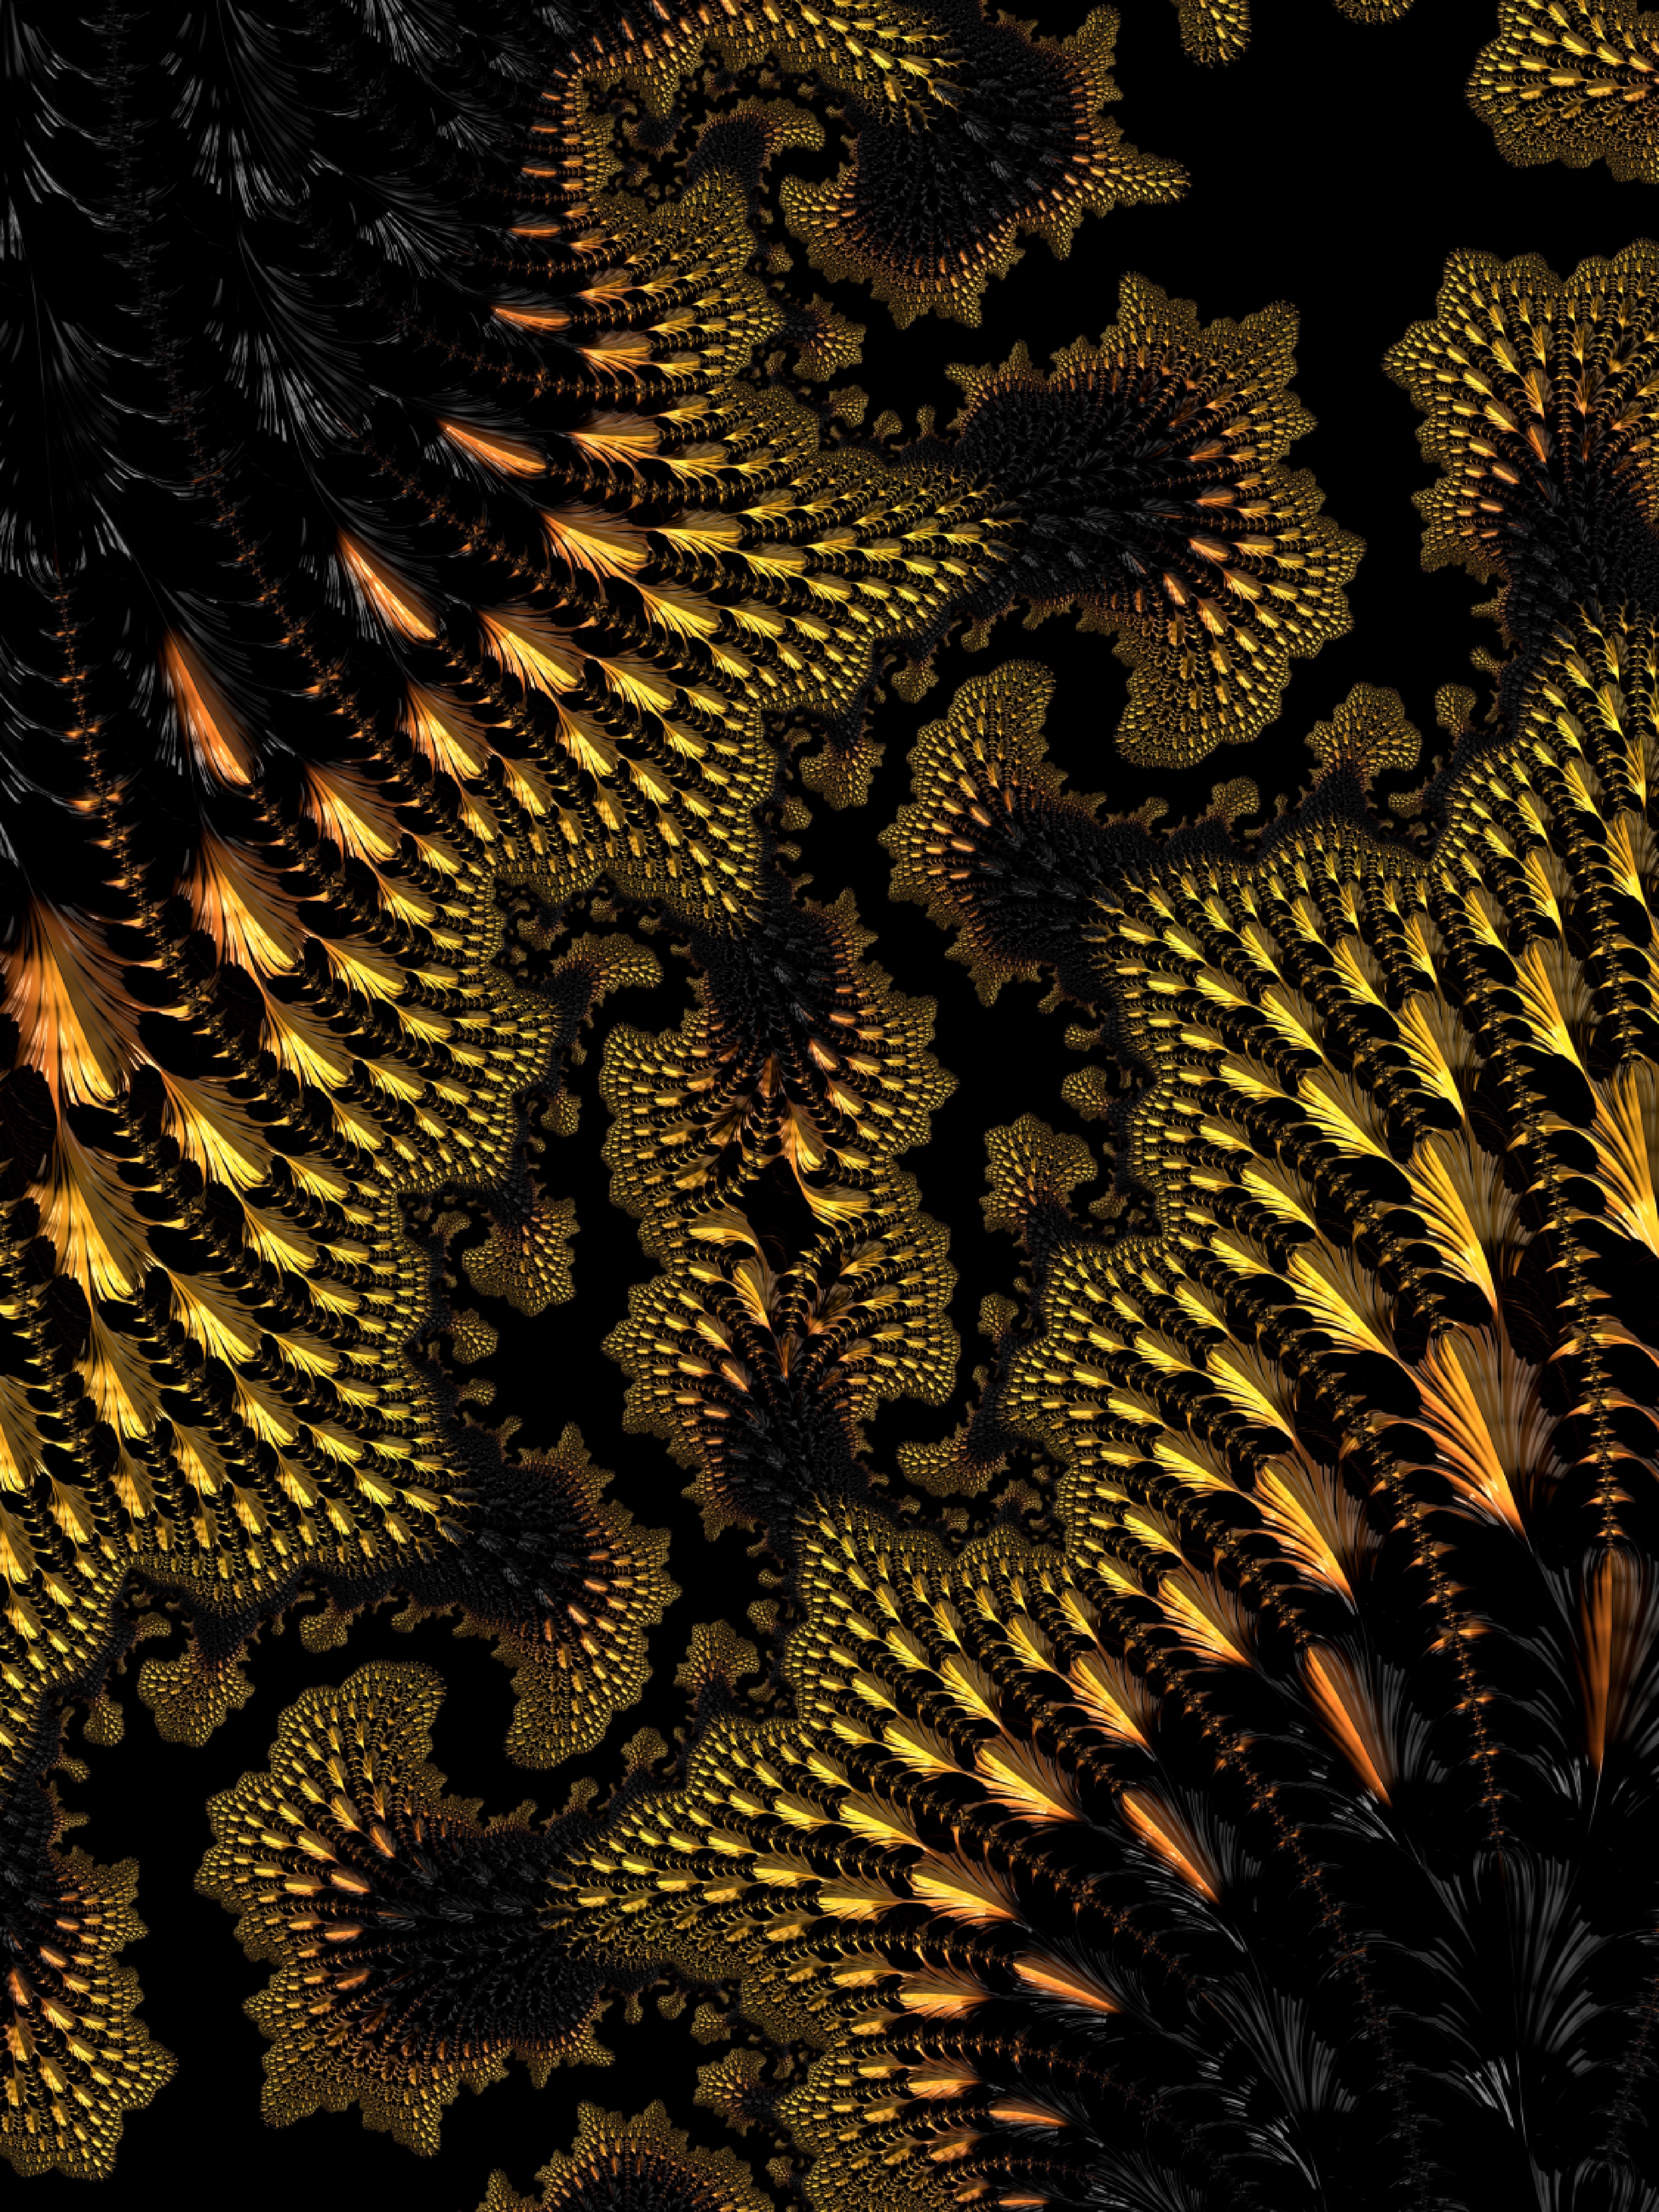 fractal, ornate, 3d, abstract, black, yellow, winding, sinuous Aesthetic wallpaper